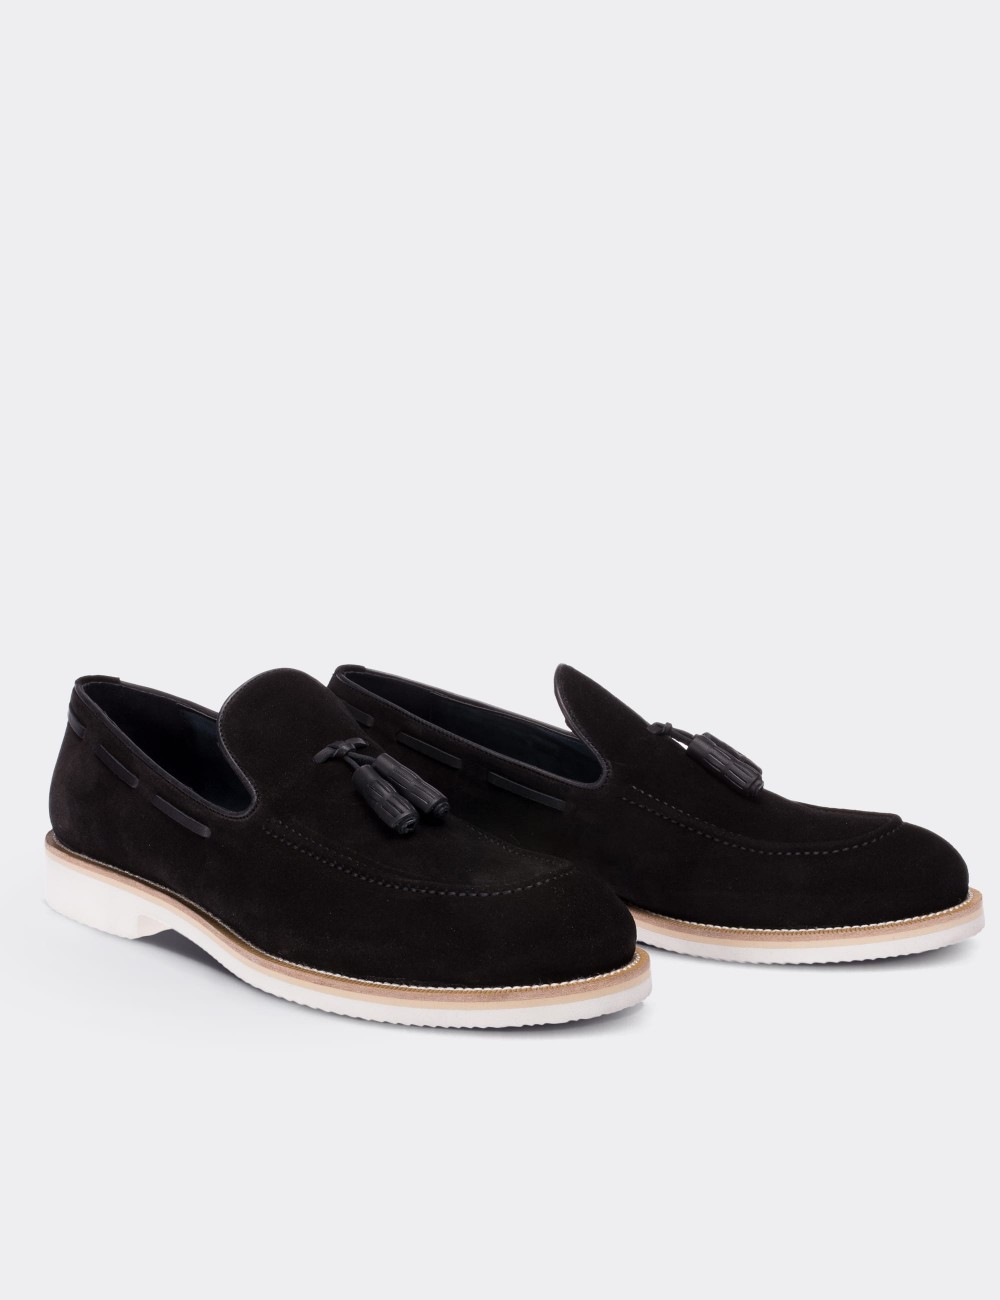 Black Suede Leather Loafers - 01319MSYHE02